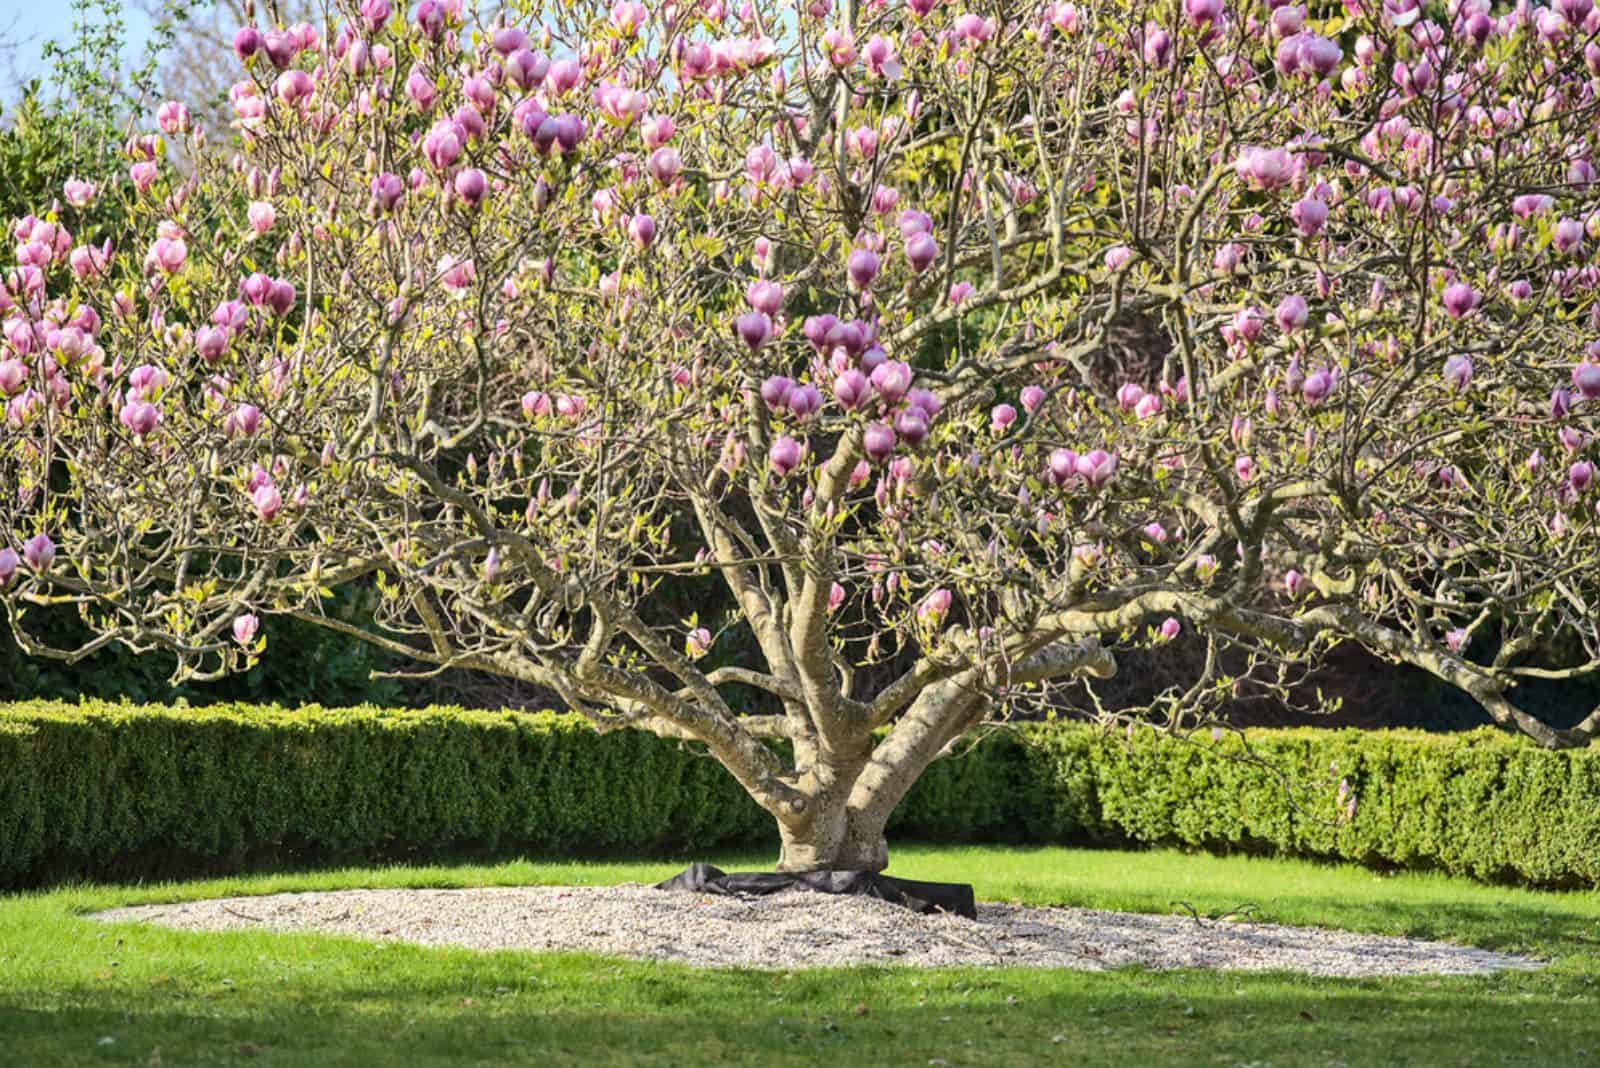 Saucer Magnolia planted in the garden